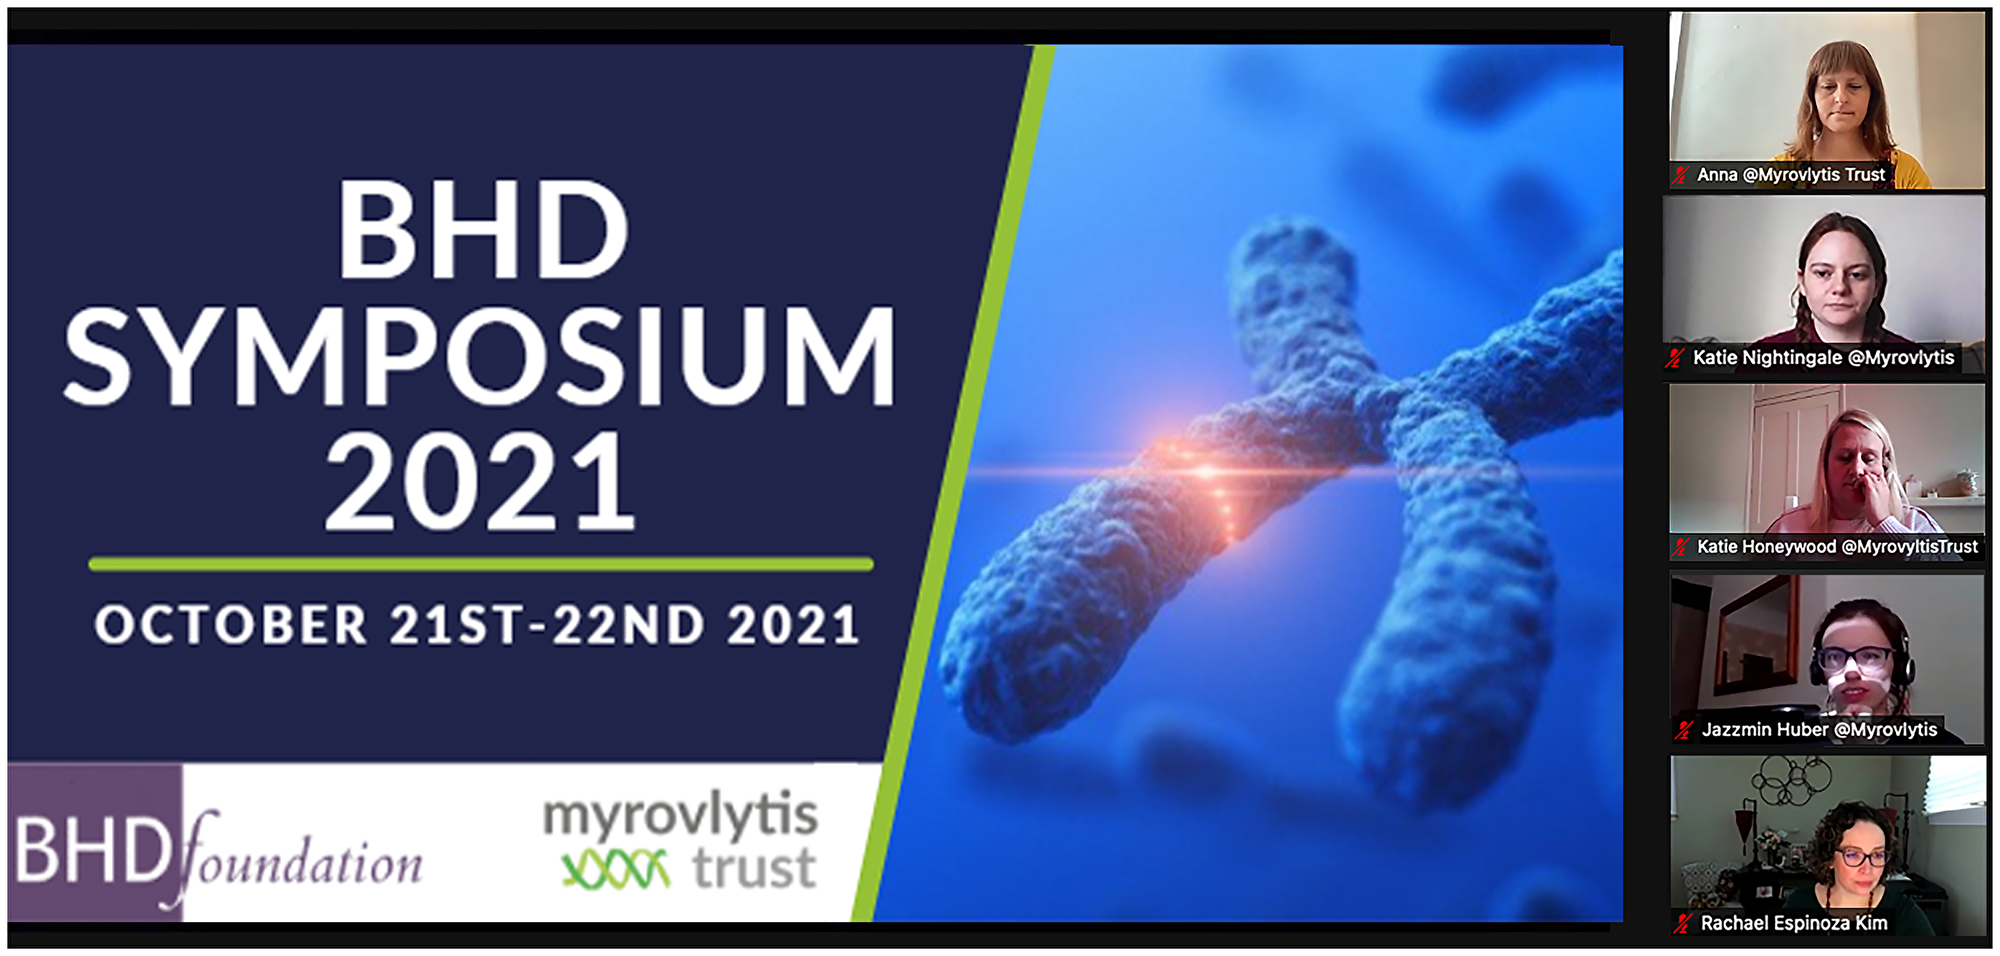 BHD international symposium 2021 was held with great success on October 21–22, 2021 with over 200 participants including scientists, clinicians and patients.